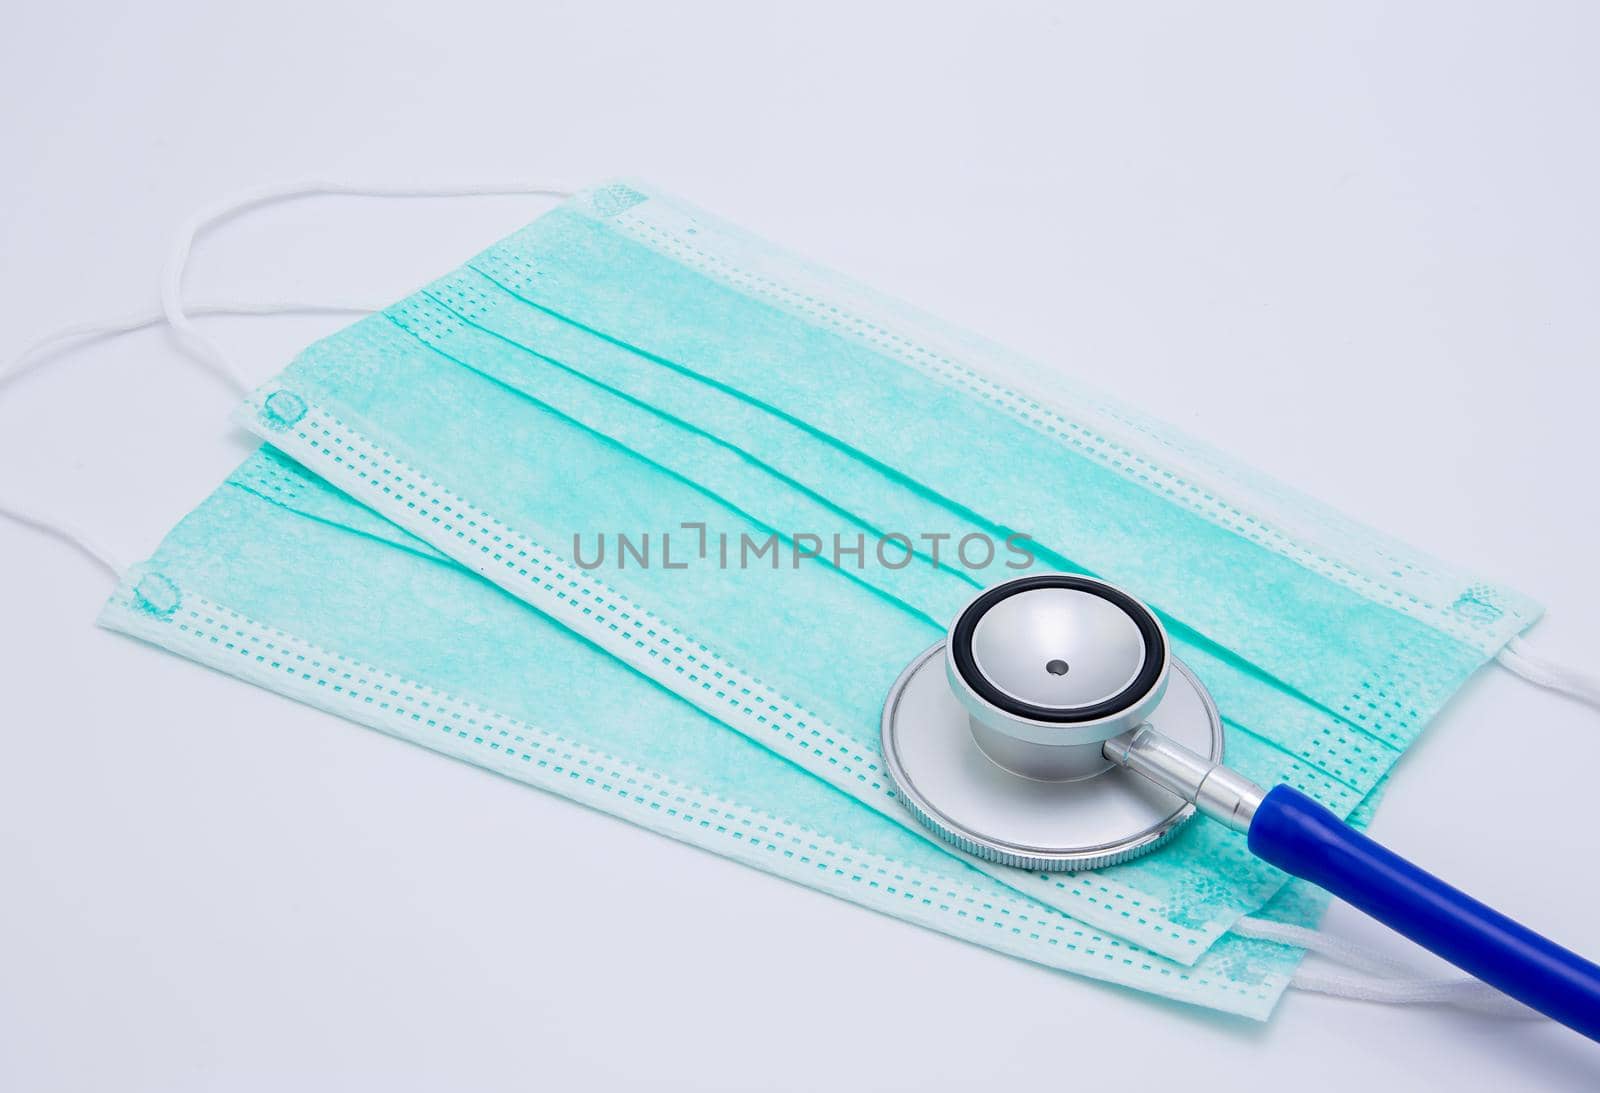 Face mask for protective epidemic covid-19 and stethoscope isolated on white background, equipment for protect outbreak of coronavirus, safety and hygiene, prevention for bacteria and allergy.